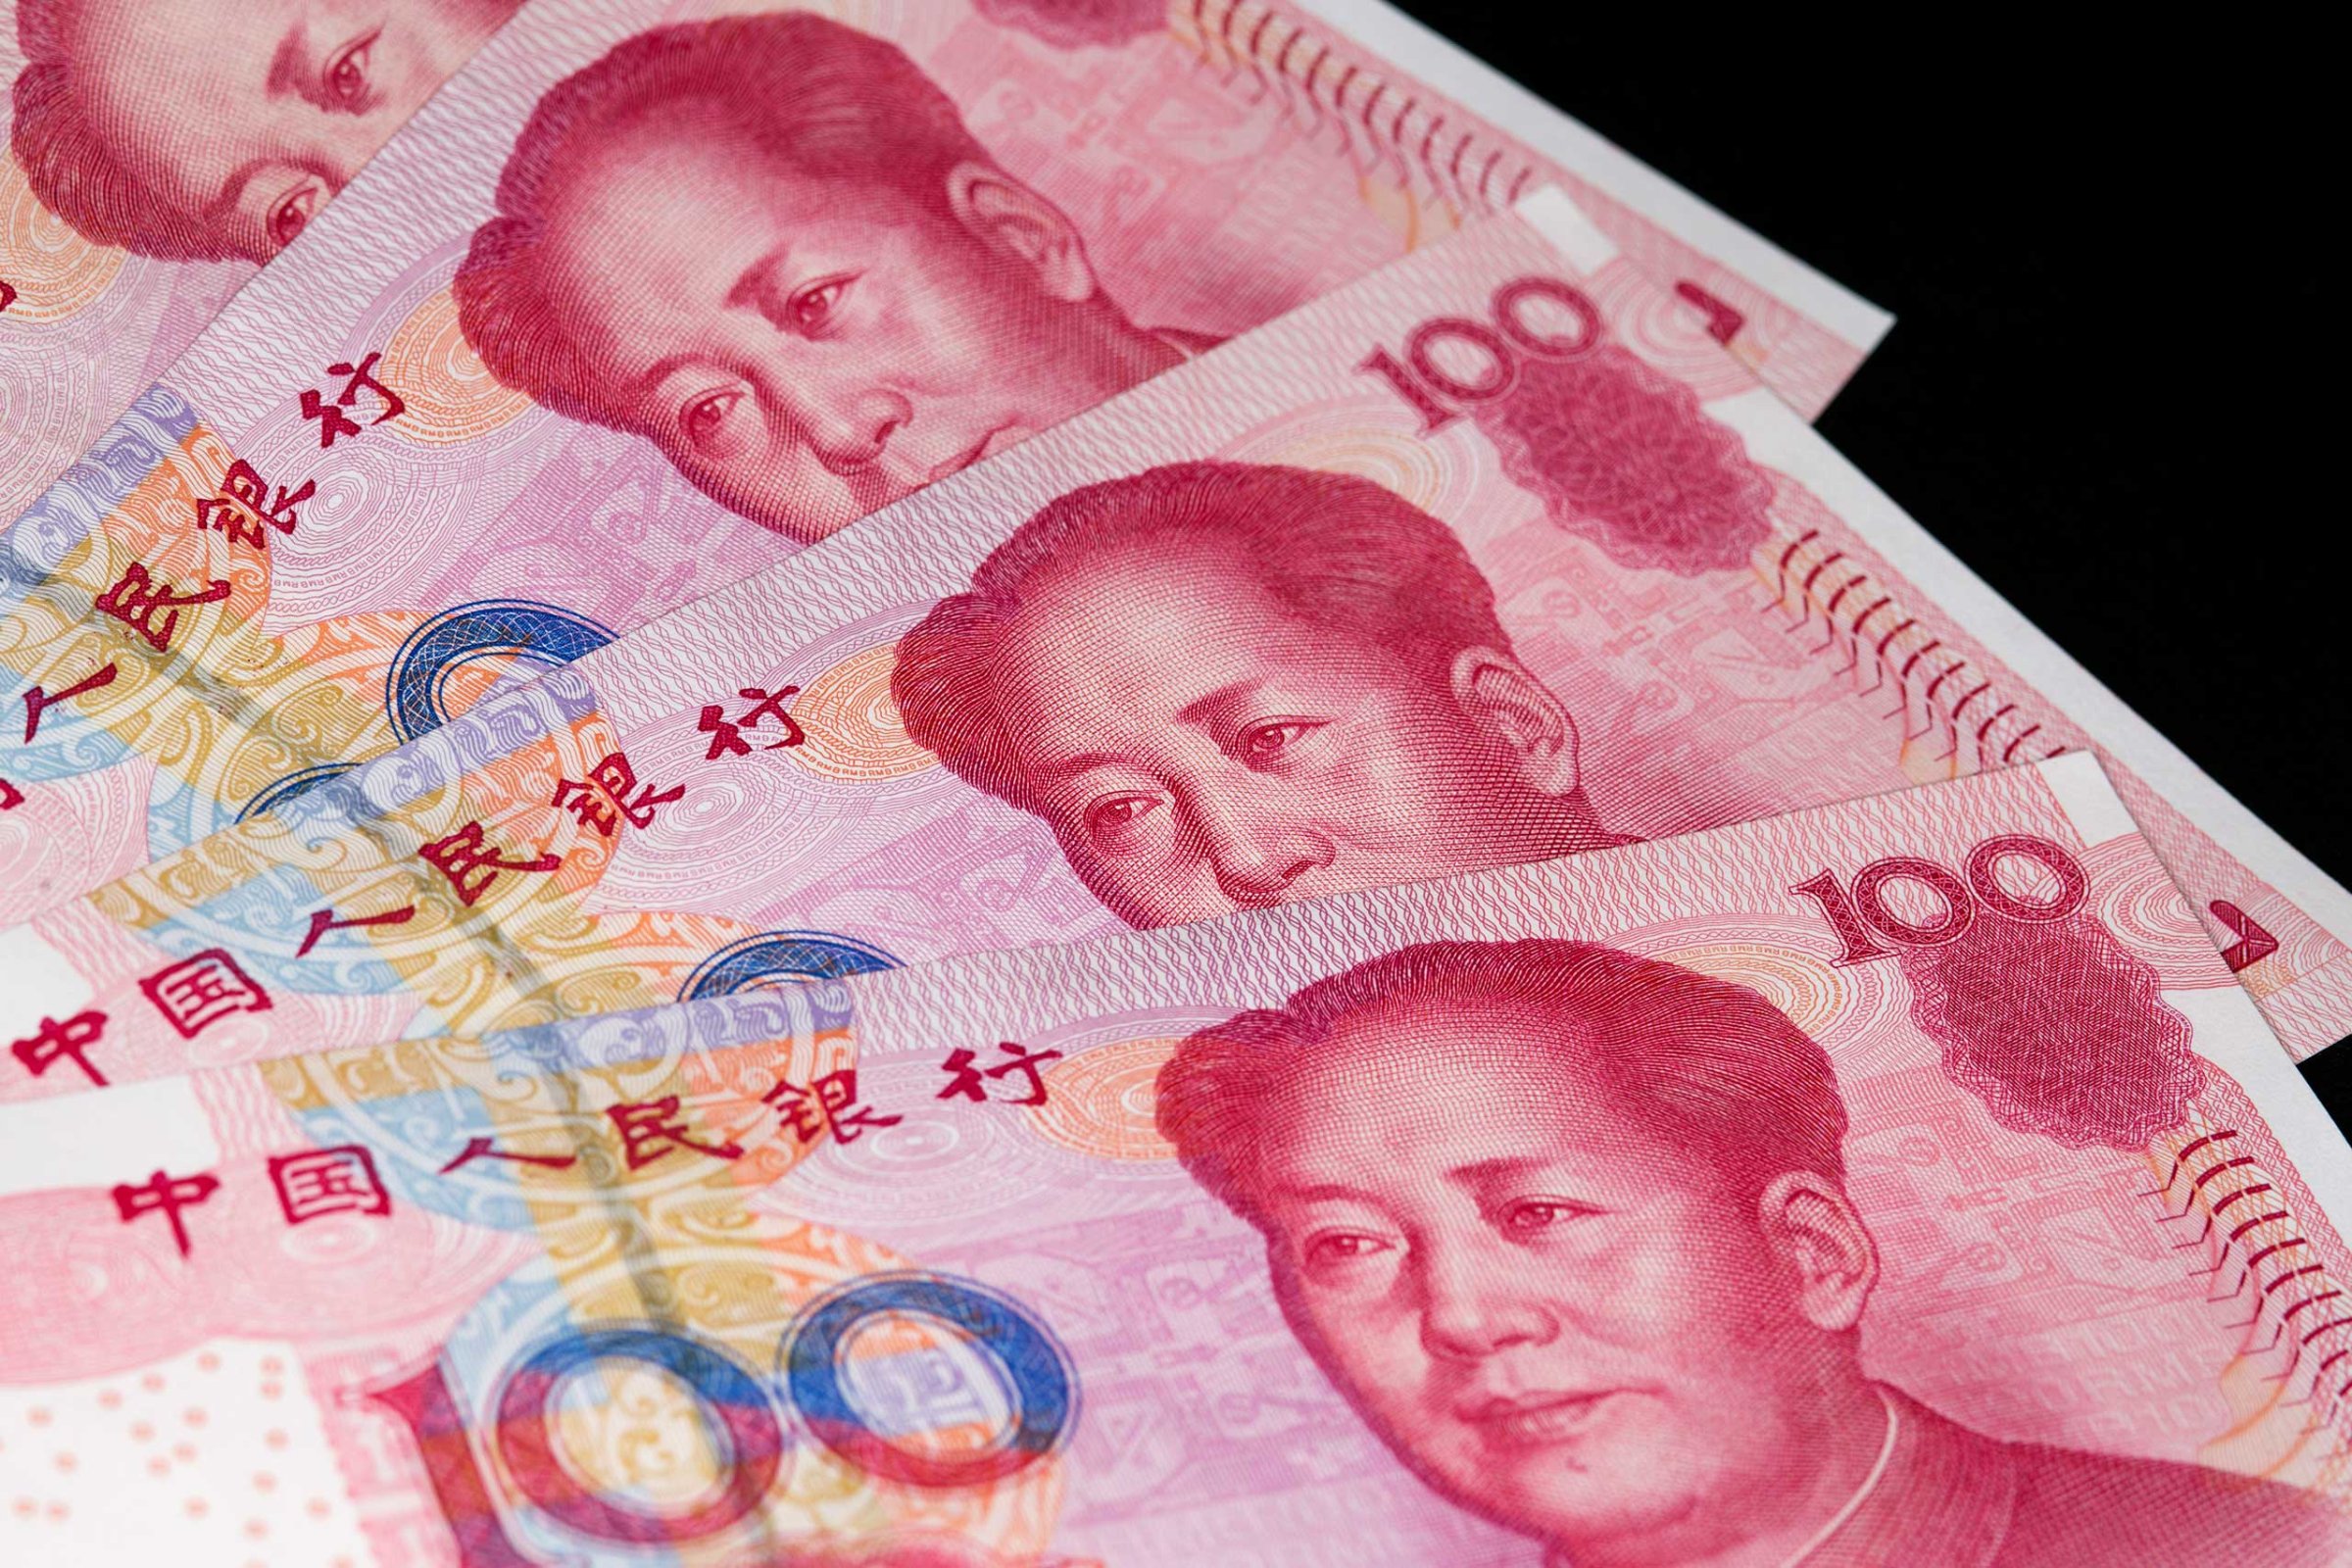 Chinese one-hundred yuan banknotes